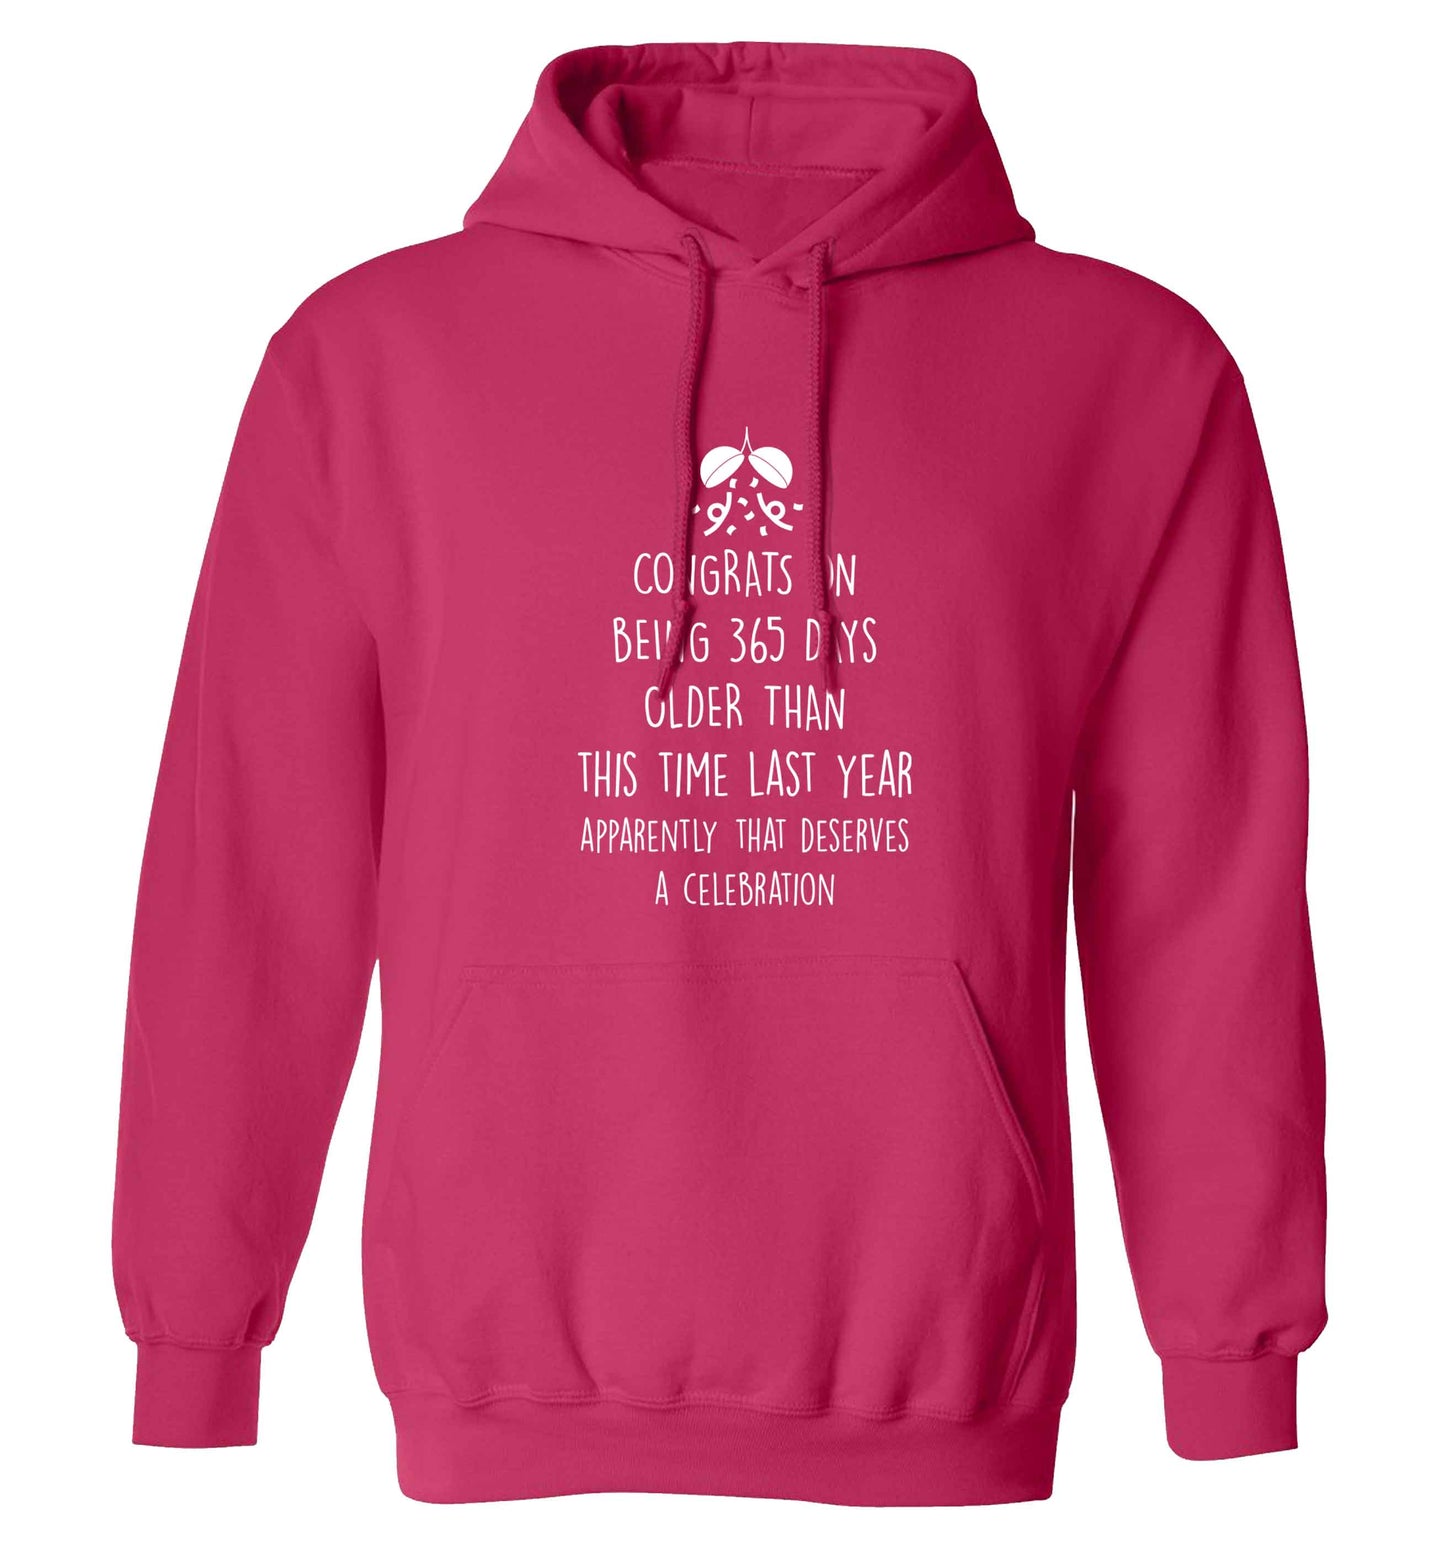 Congrats on being 365 days older than you were this time last year apparently that deserves a celebration adults unisex pink hoodie 2XL